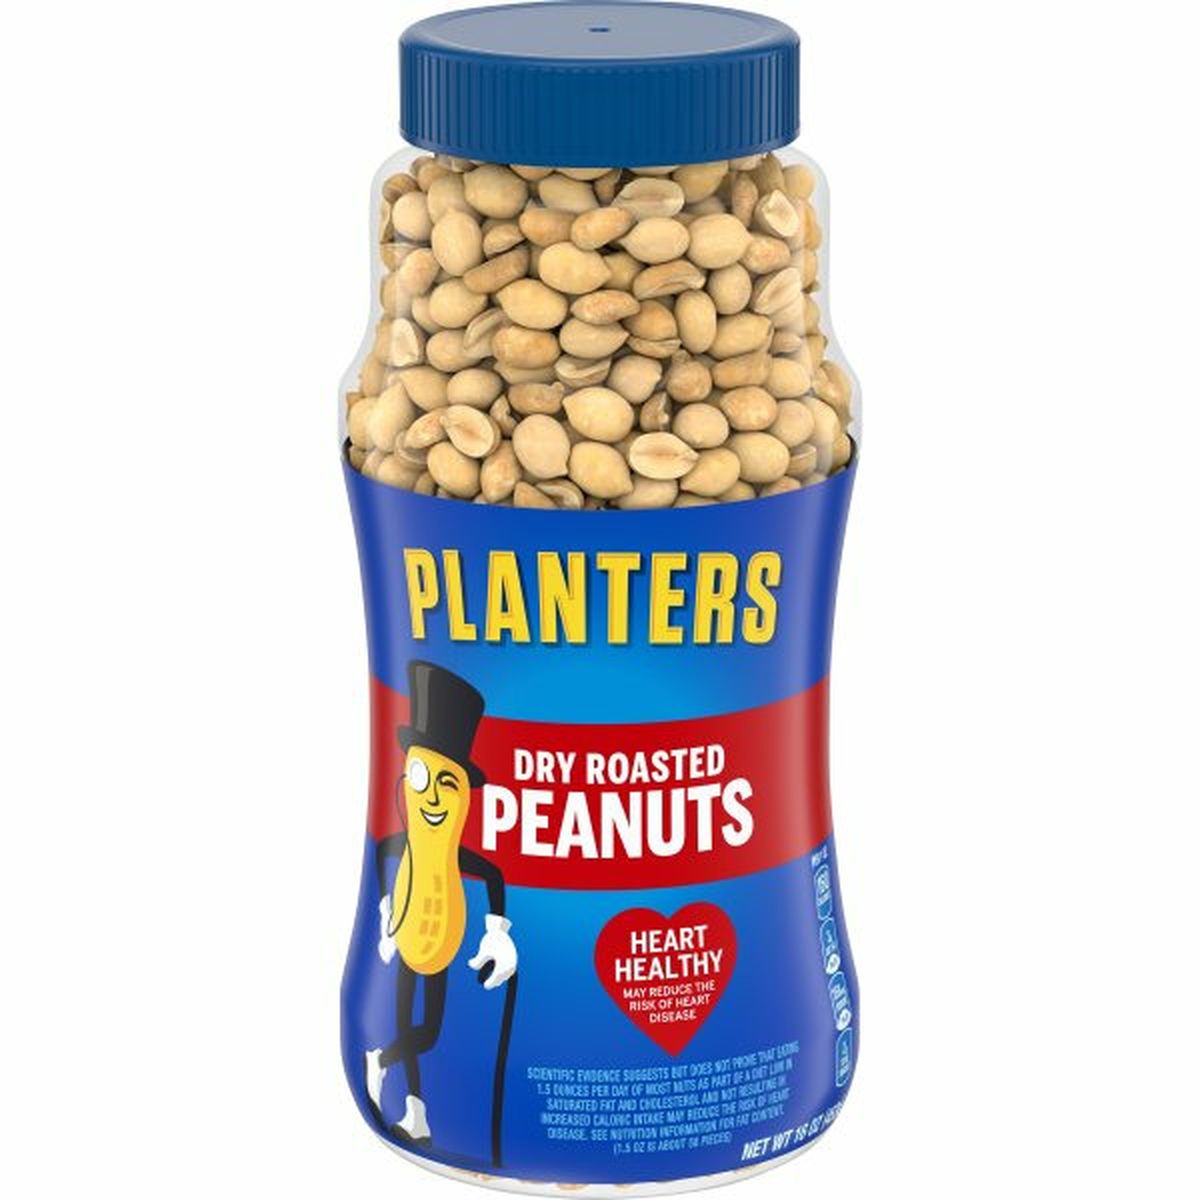 Calories in Planters Dry Roasted Peanuts